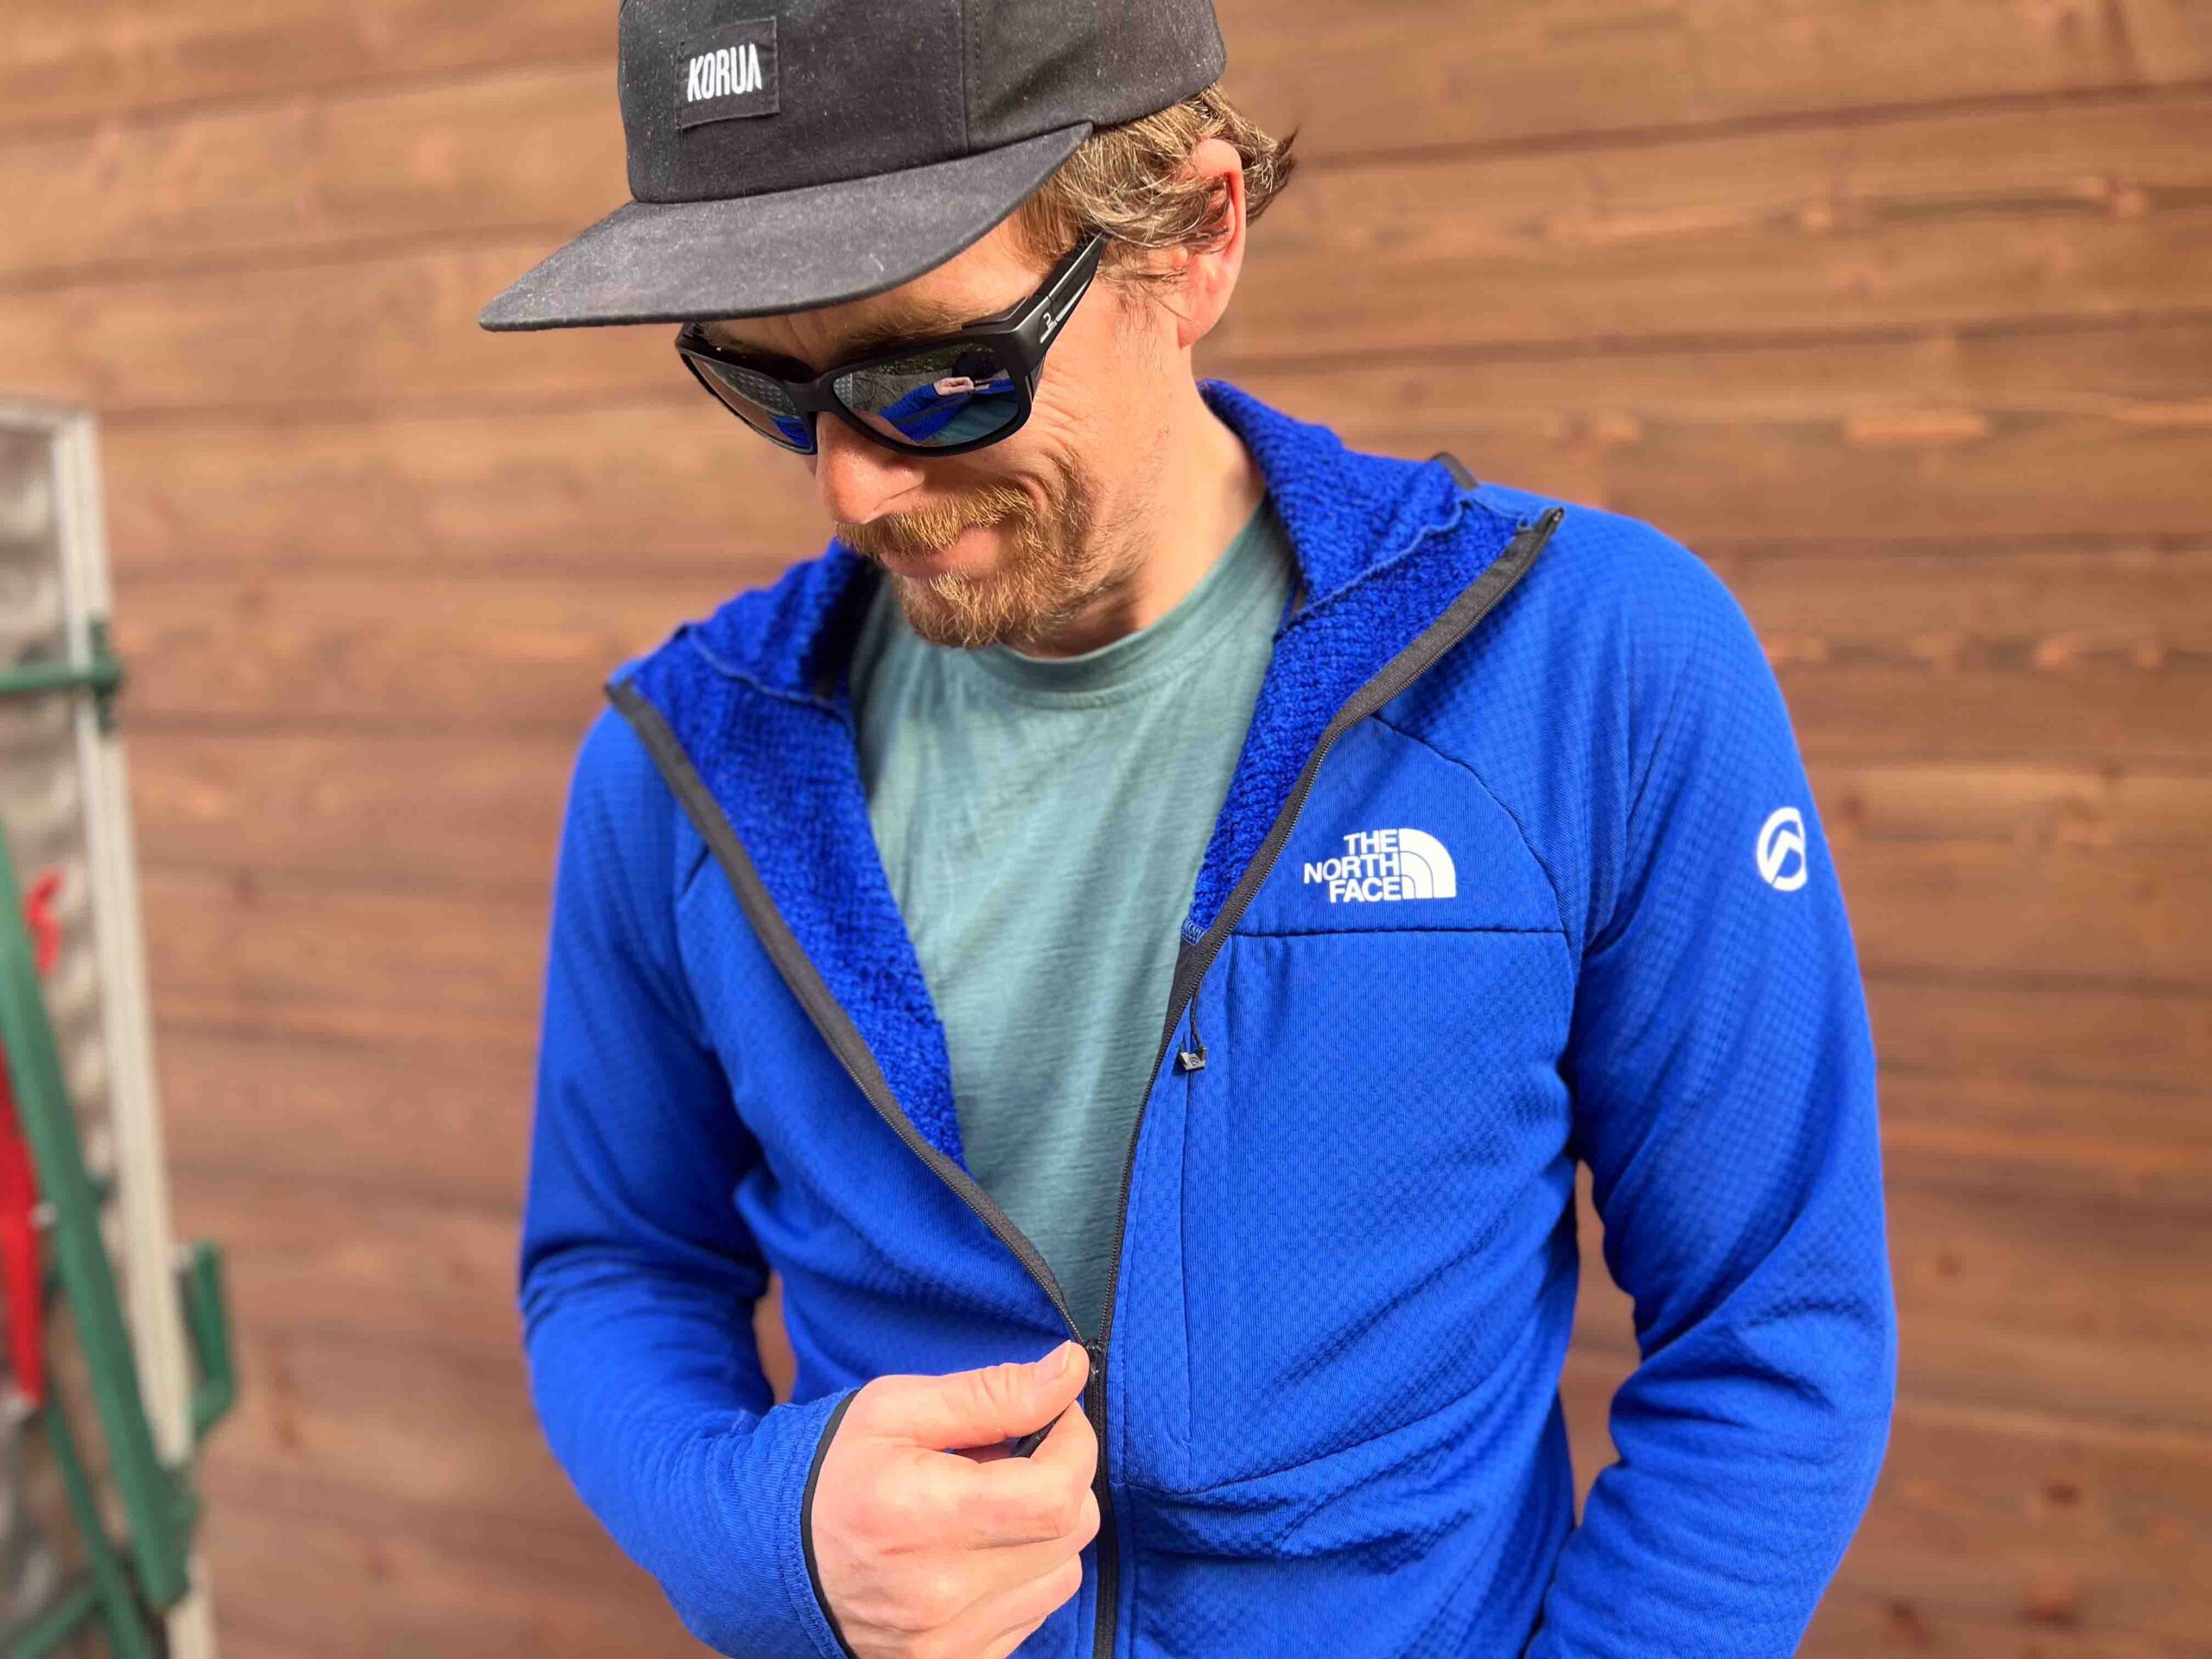 Tried & Tested, The North Face Summit Series